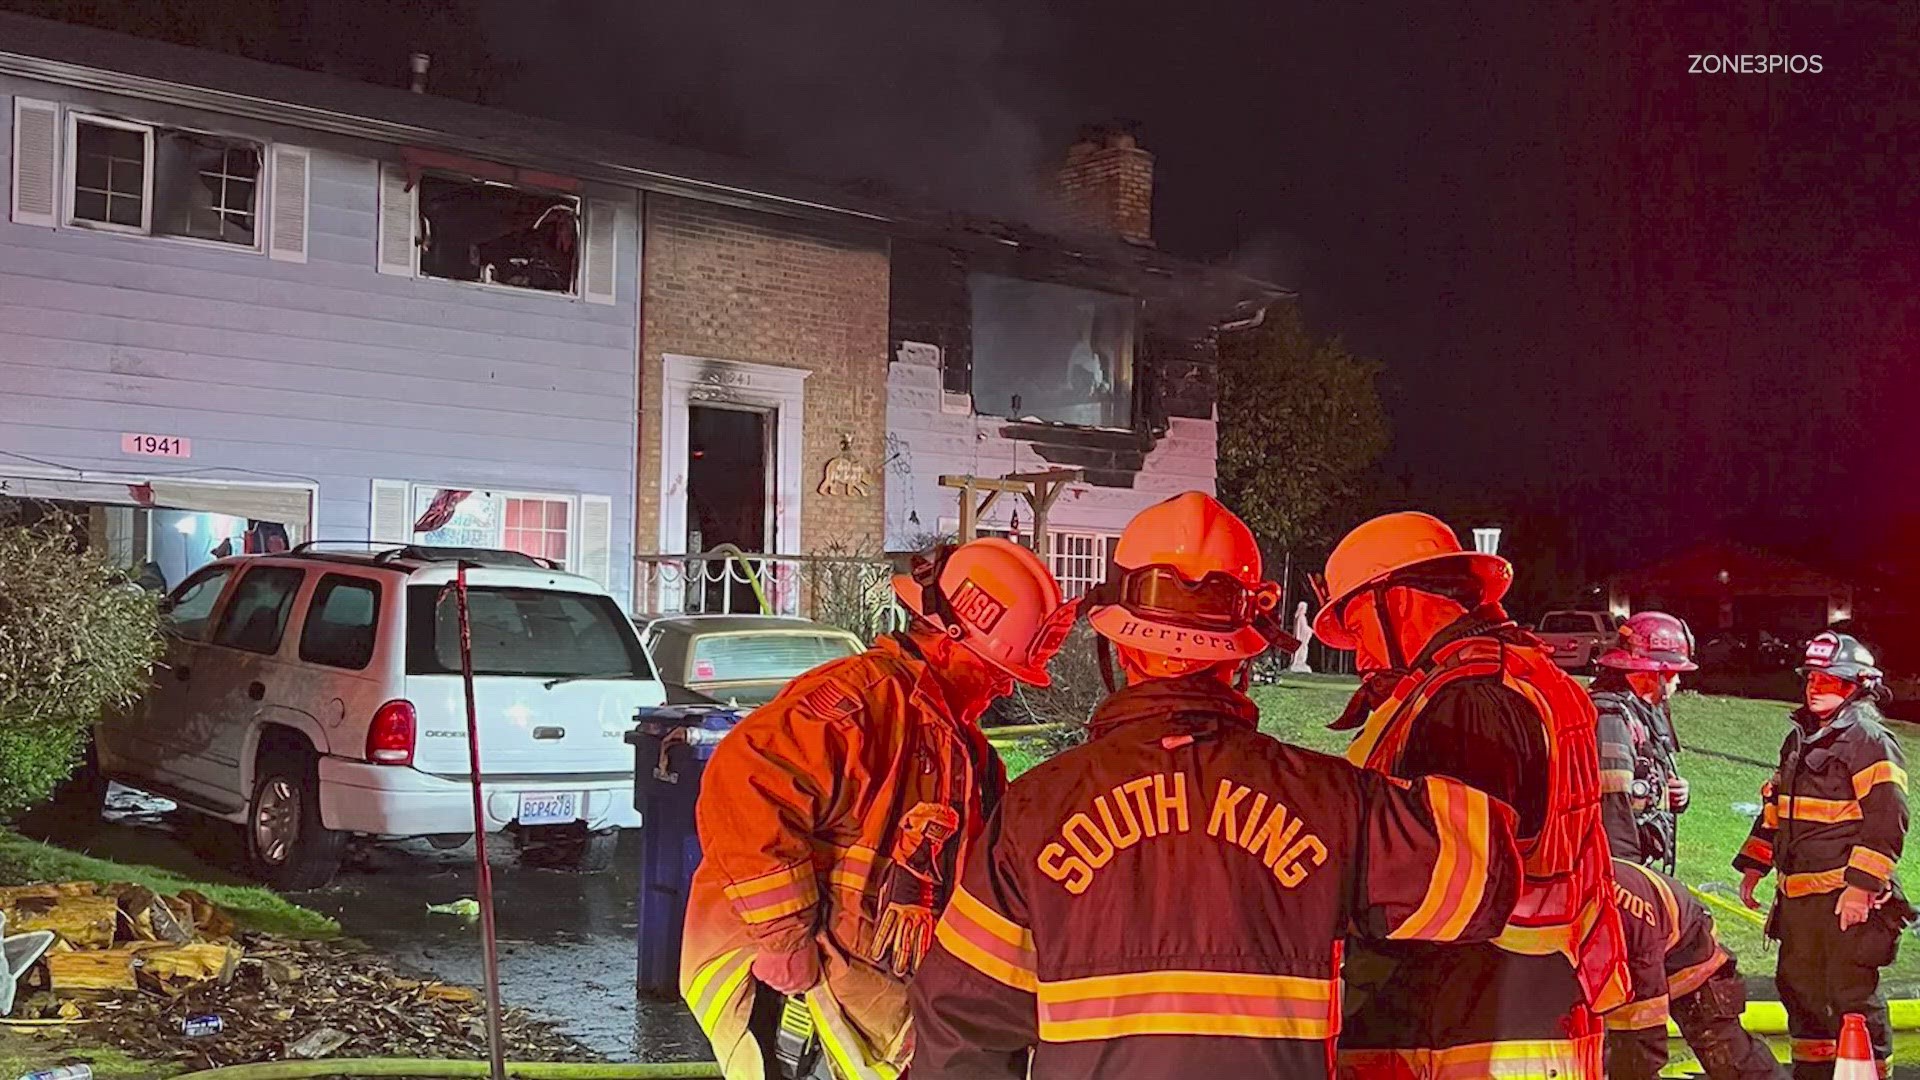 Firefighters said 11 people were in the home when the fire started just after 6 a.m.